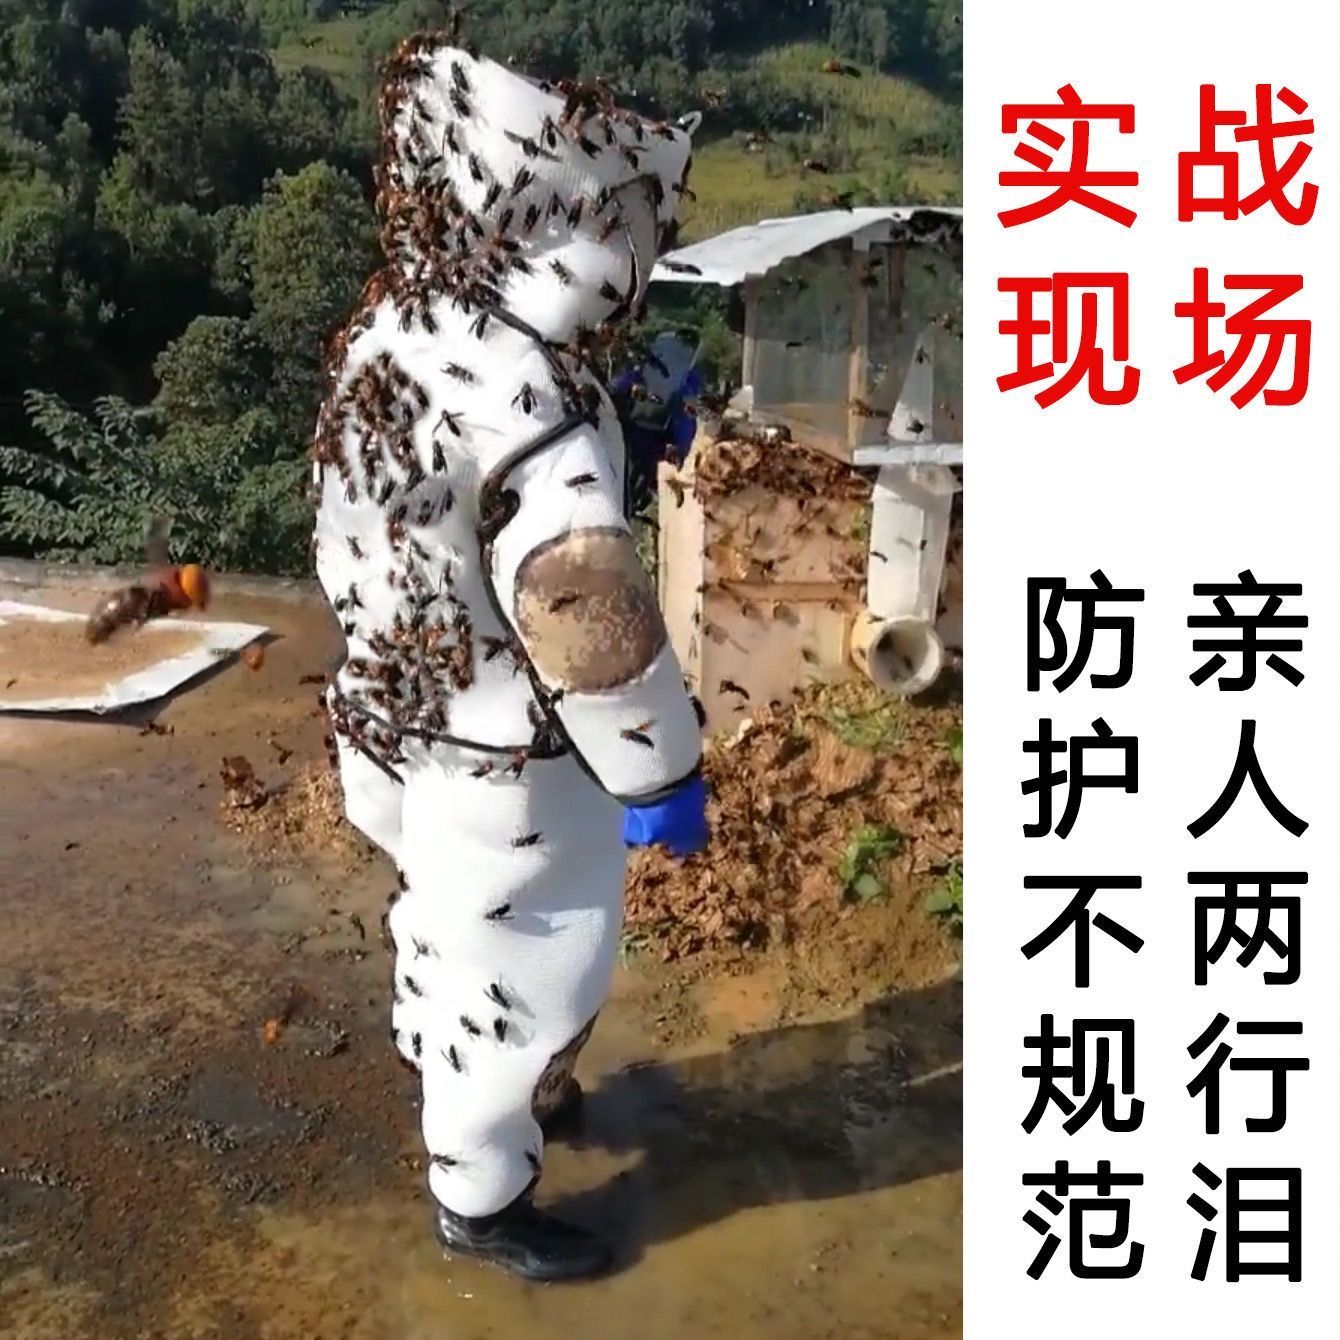 Full set of breathable and thickened wasp suit, full body wasp protective suit, full body one-piece grasping wasp suit